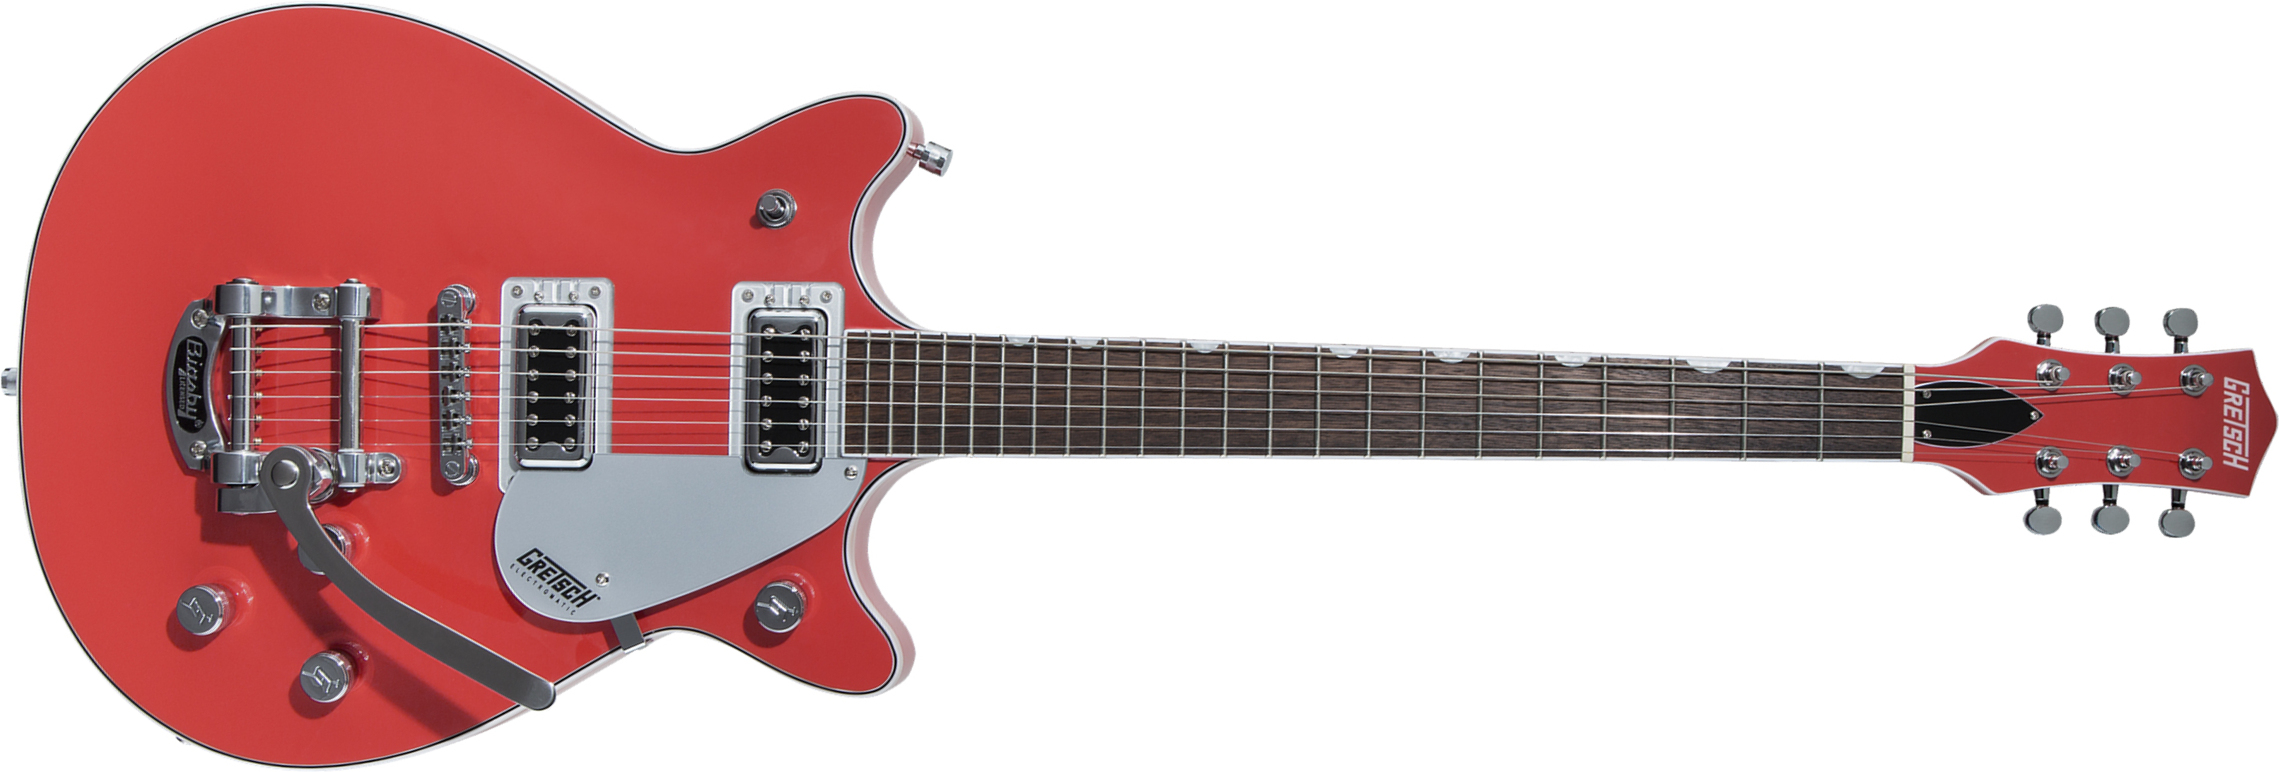 Gretsch G5232t Electromatic Double Jet Ft 2019 Hh Bigsby Lau - Tahiti Red - Double cut electric guitar - Main picture